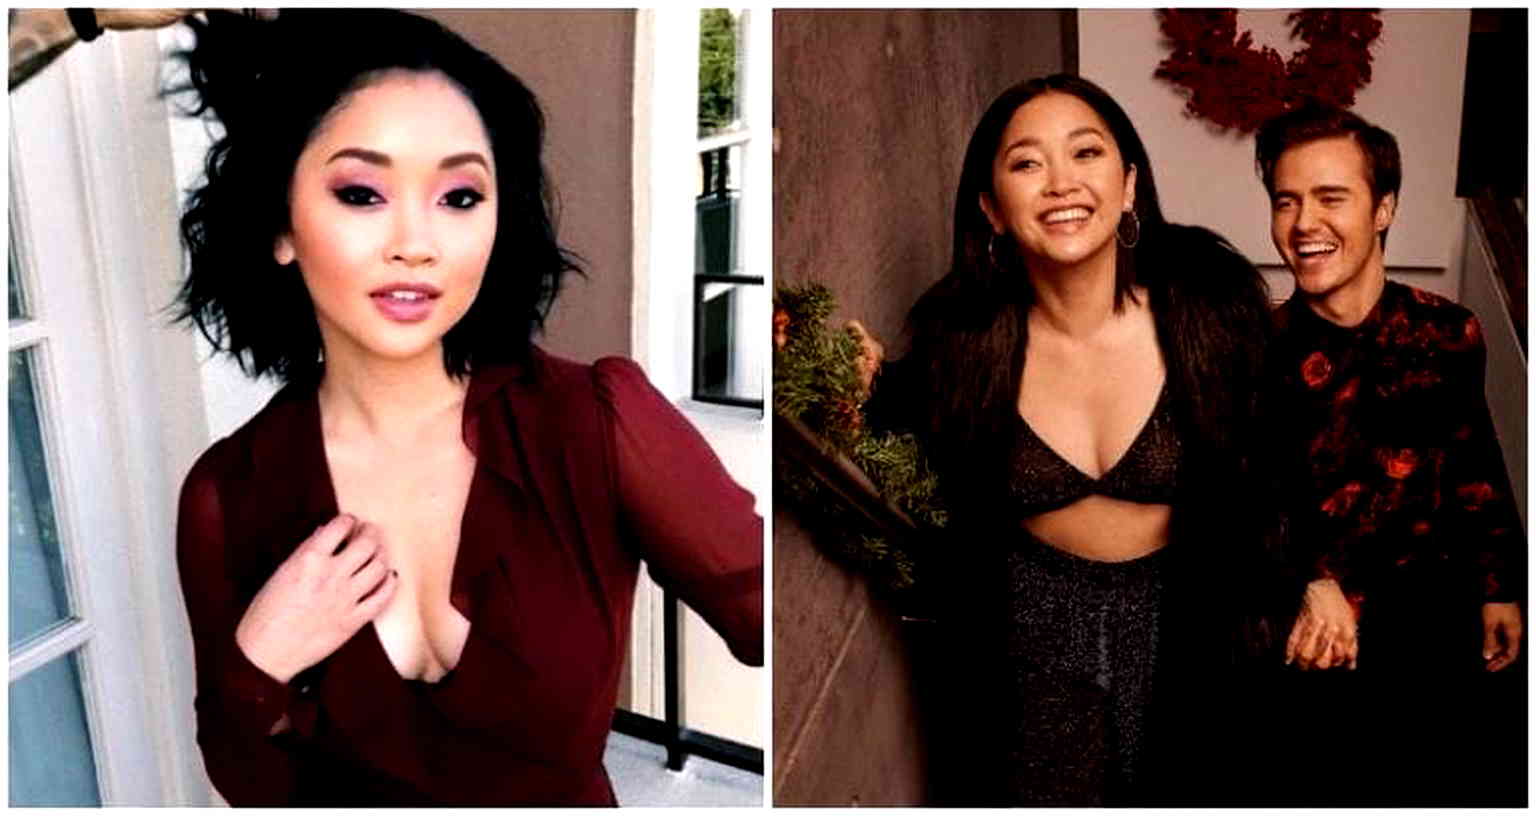 ‘To All the Boys I’ve Loved Before’ Star Lana Condor Lands New Holiday Campaign With H&M